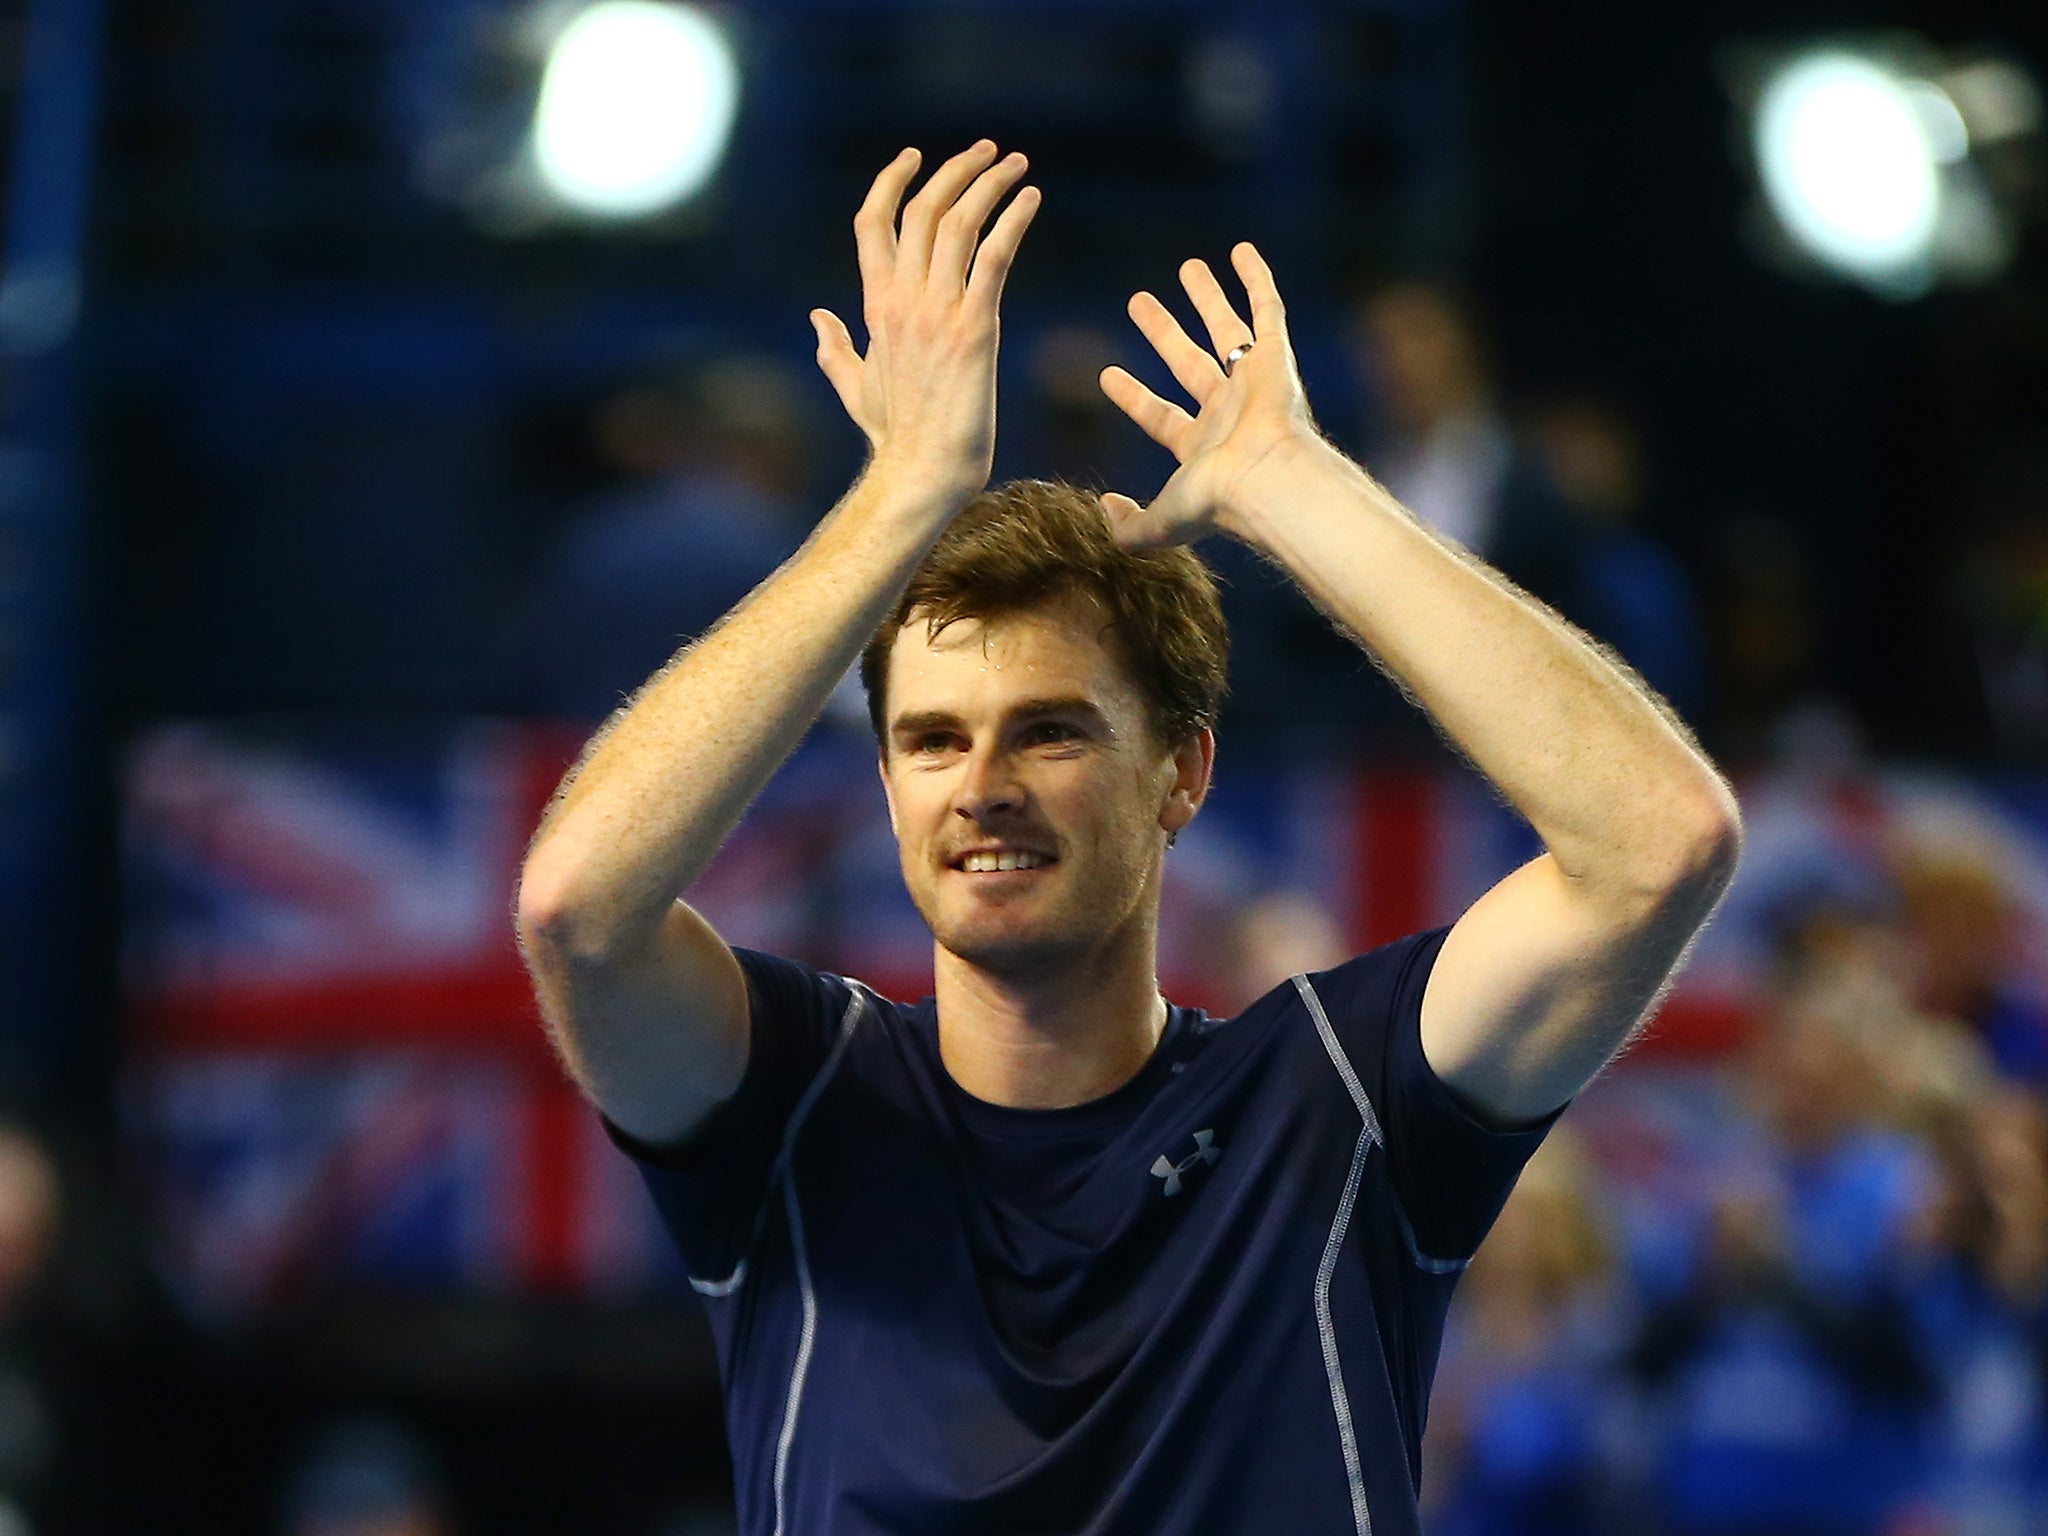 Jamie Murray will soon be able to call himself world No 1